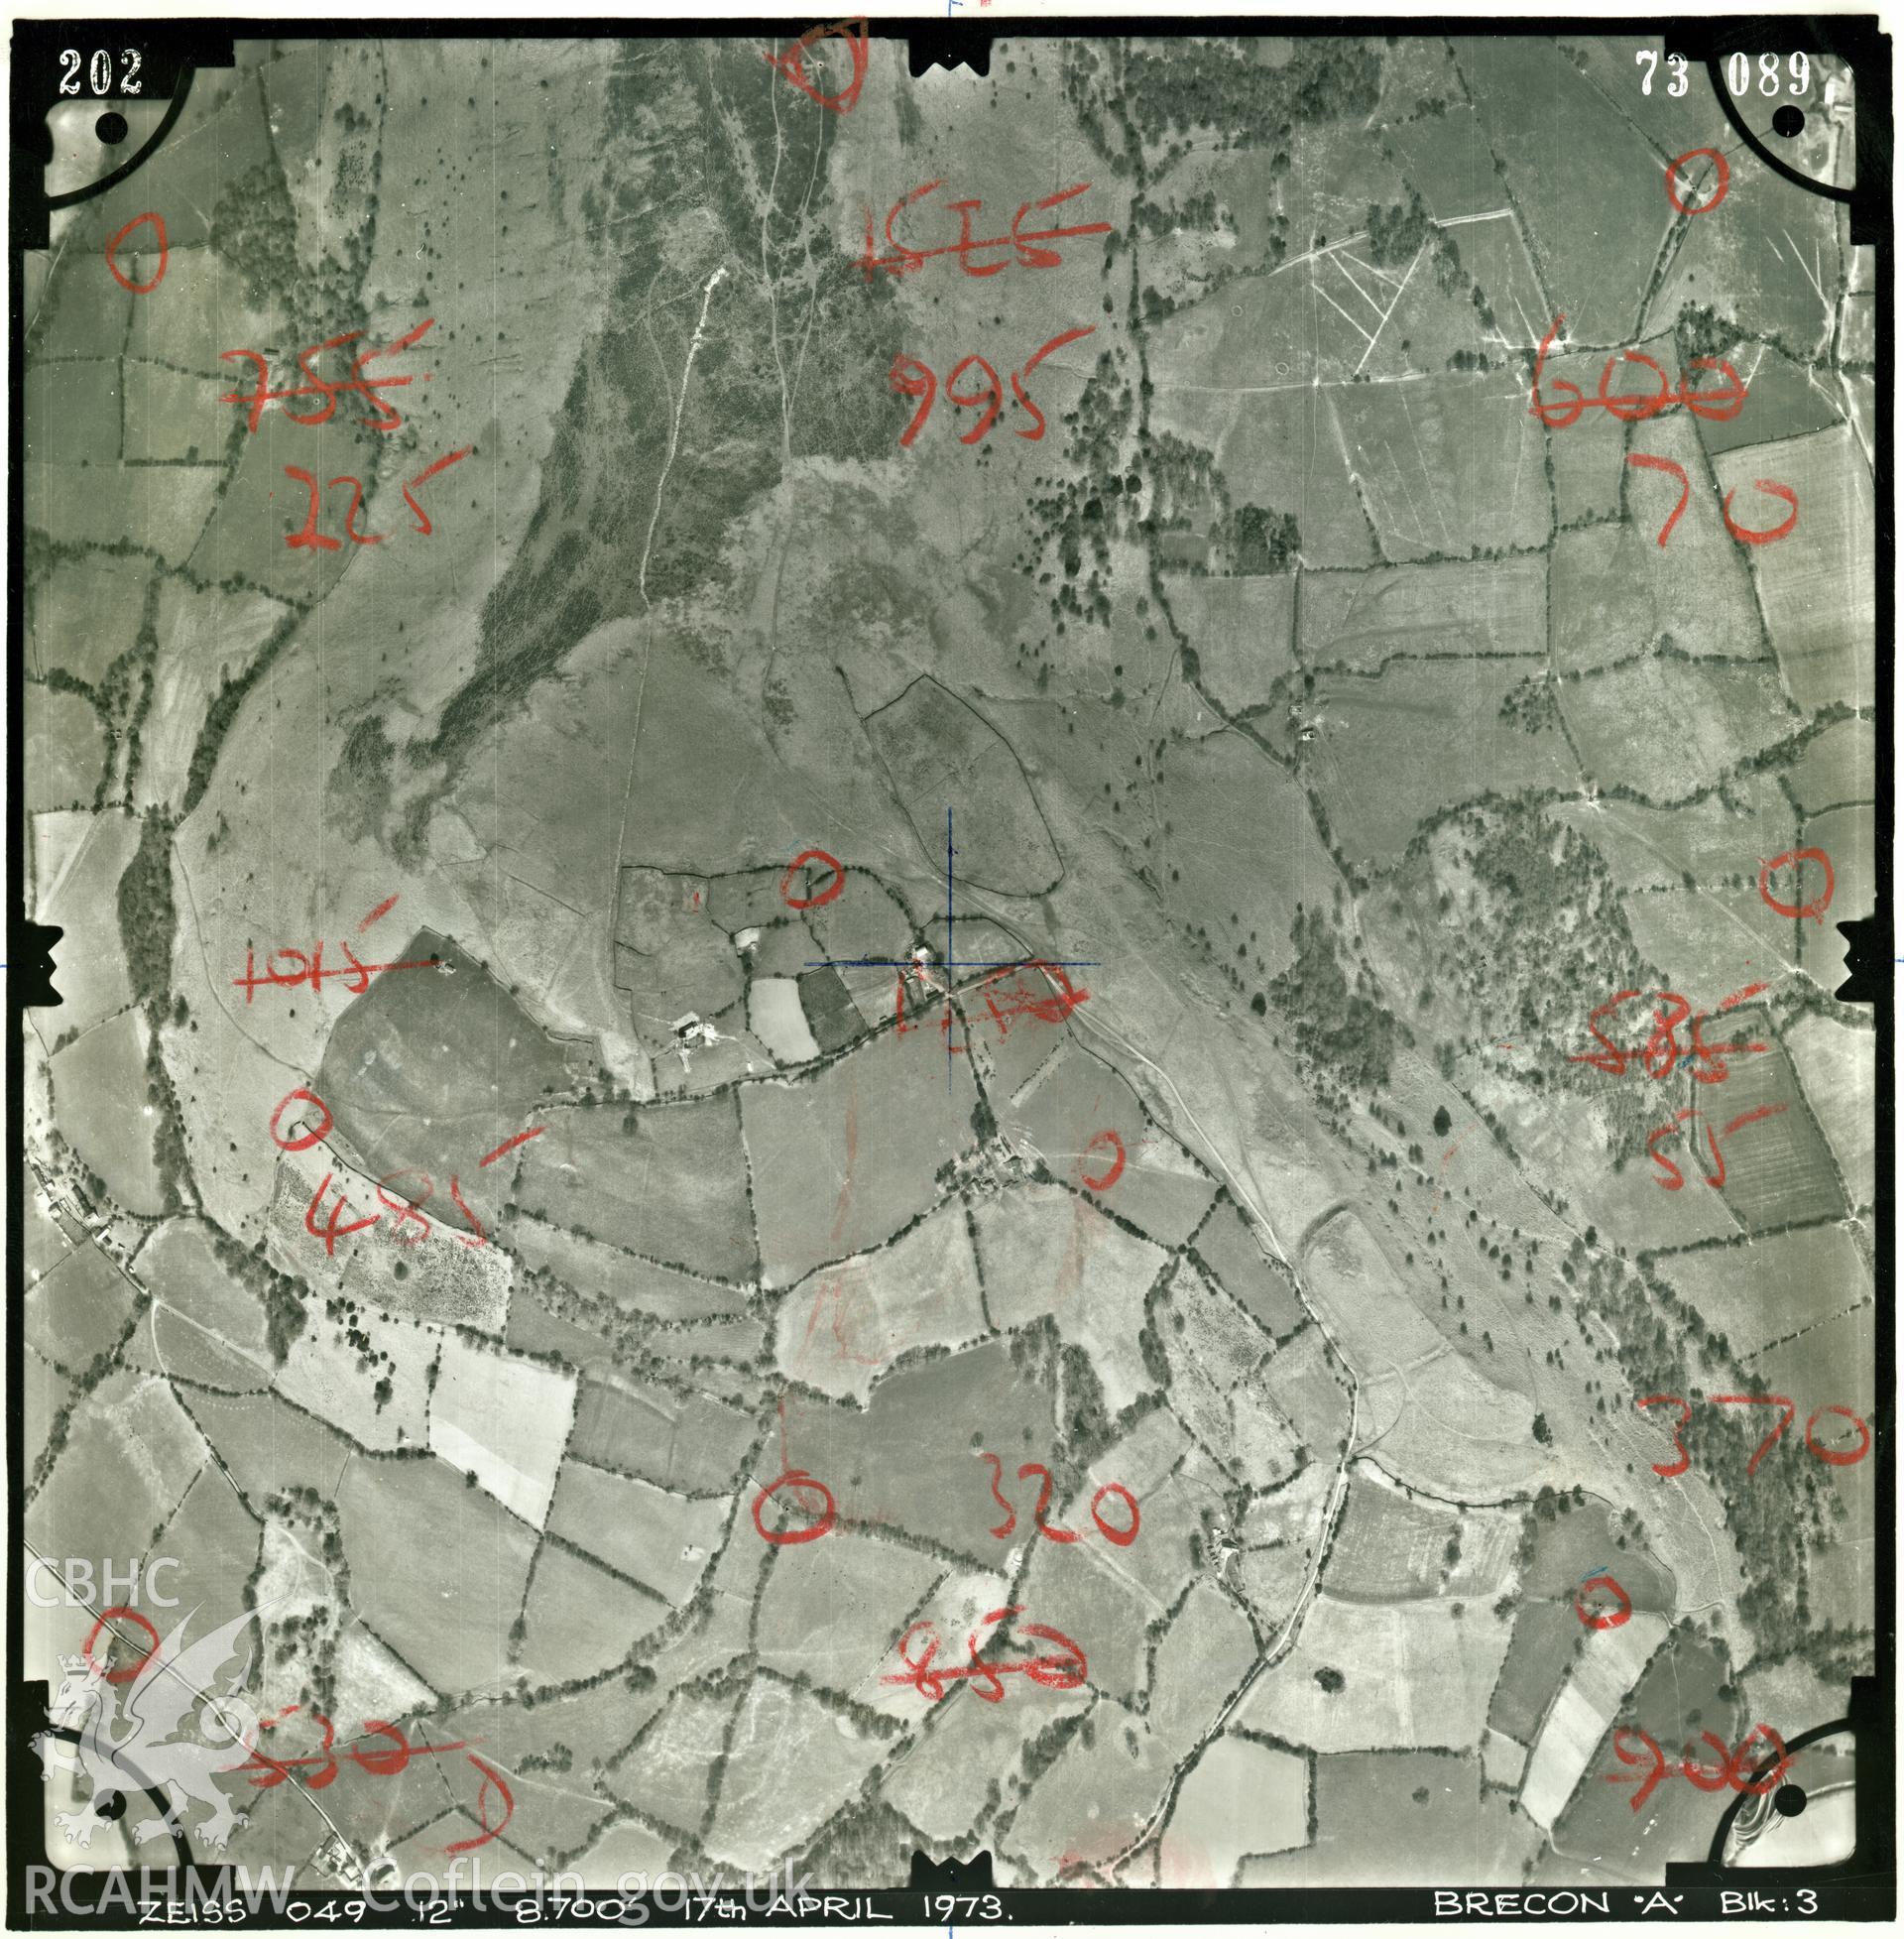 Digitized copy of an aerial photograph showing Llanthony Priory, taken by Ordnance Survey, 1975.